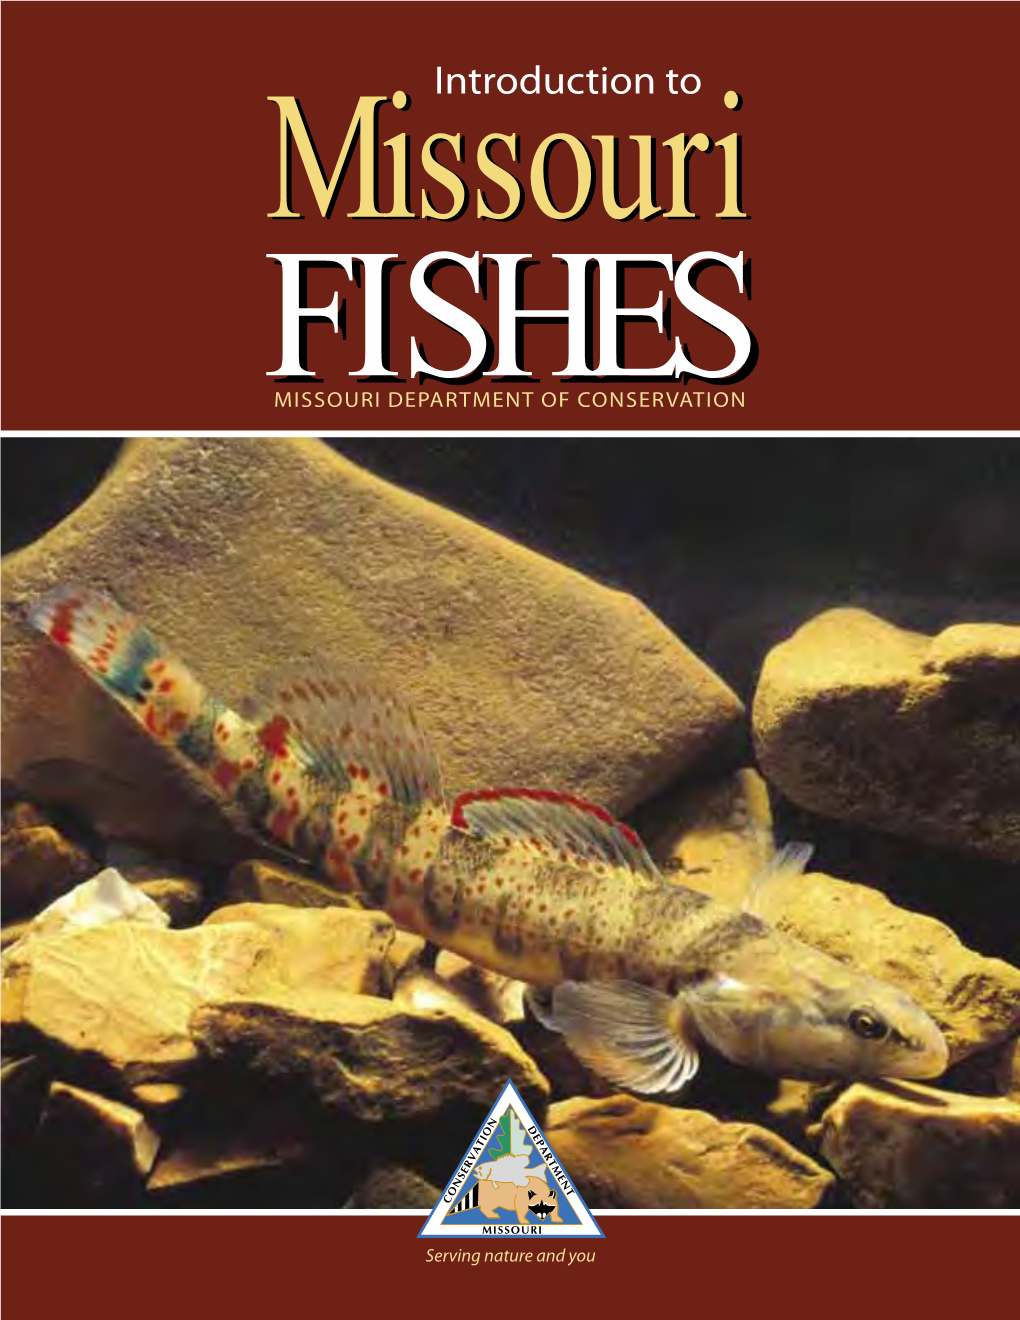 Introduction to Missouri Fishes